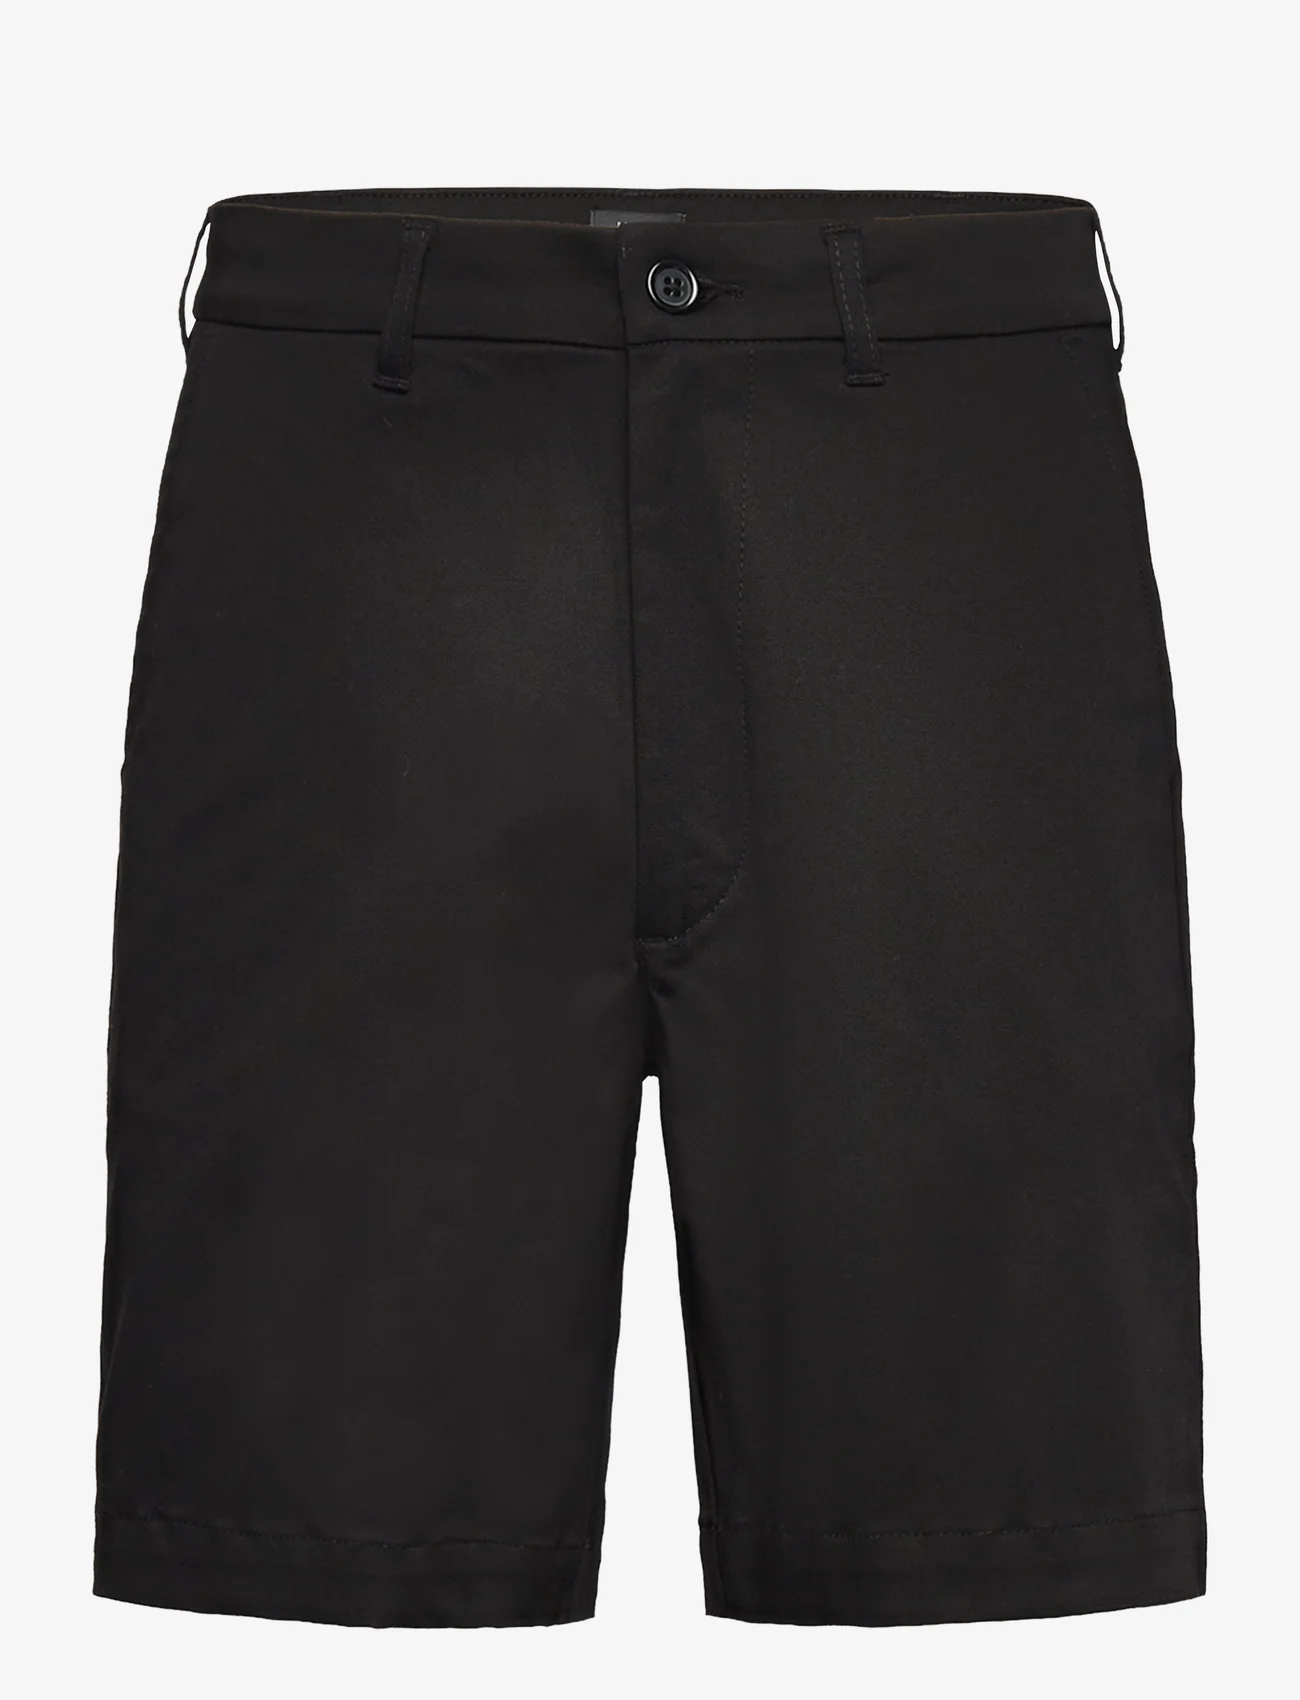 Mads Nørgaard - Cotton Twill Stretch Elias Shorts - nordic style - black - 0